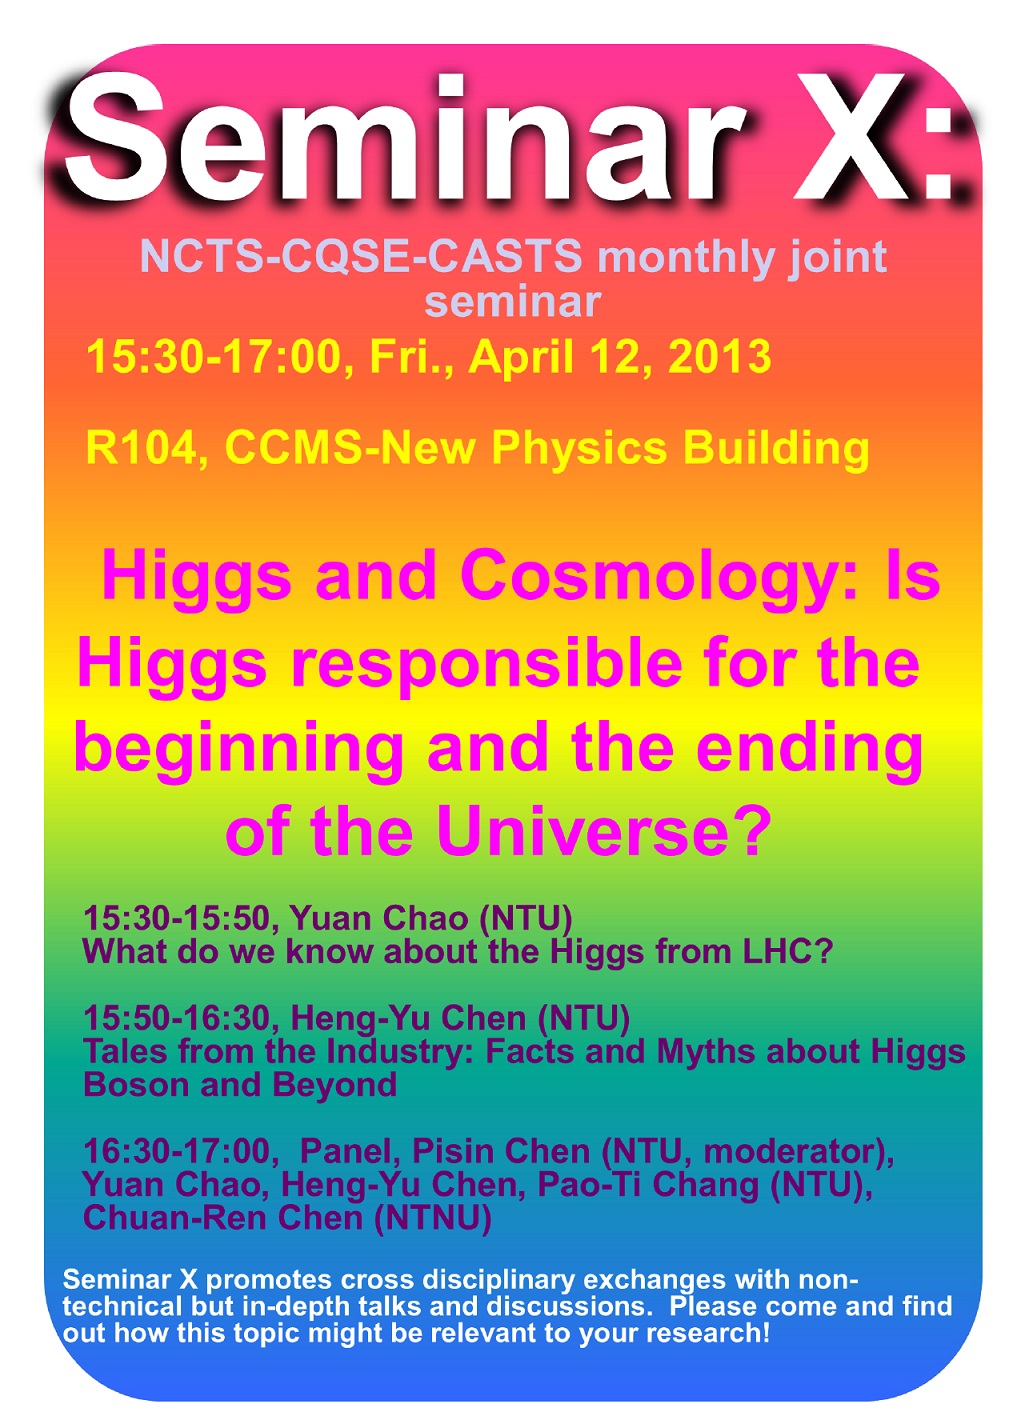 NCTS-CQSE-CASTS Monthly Joint Seminar